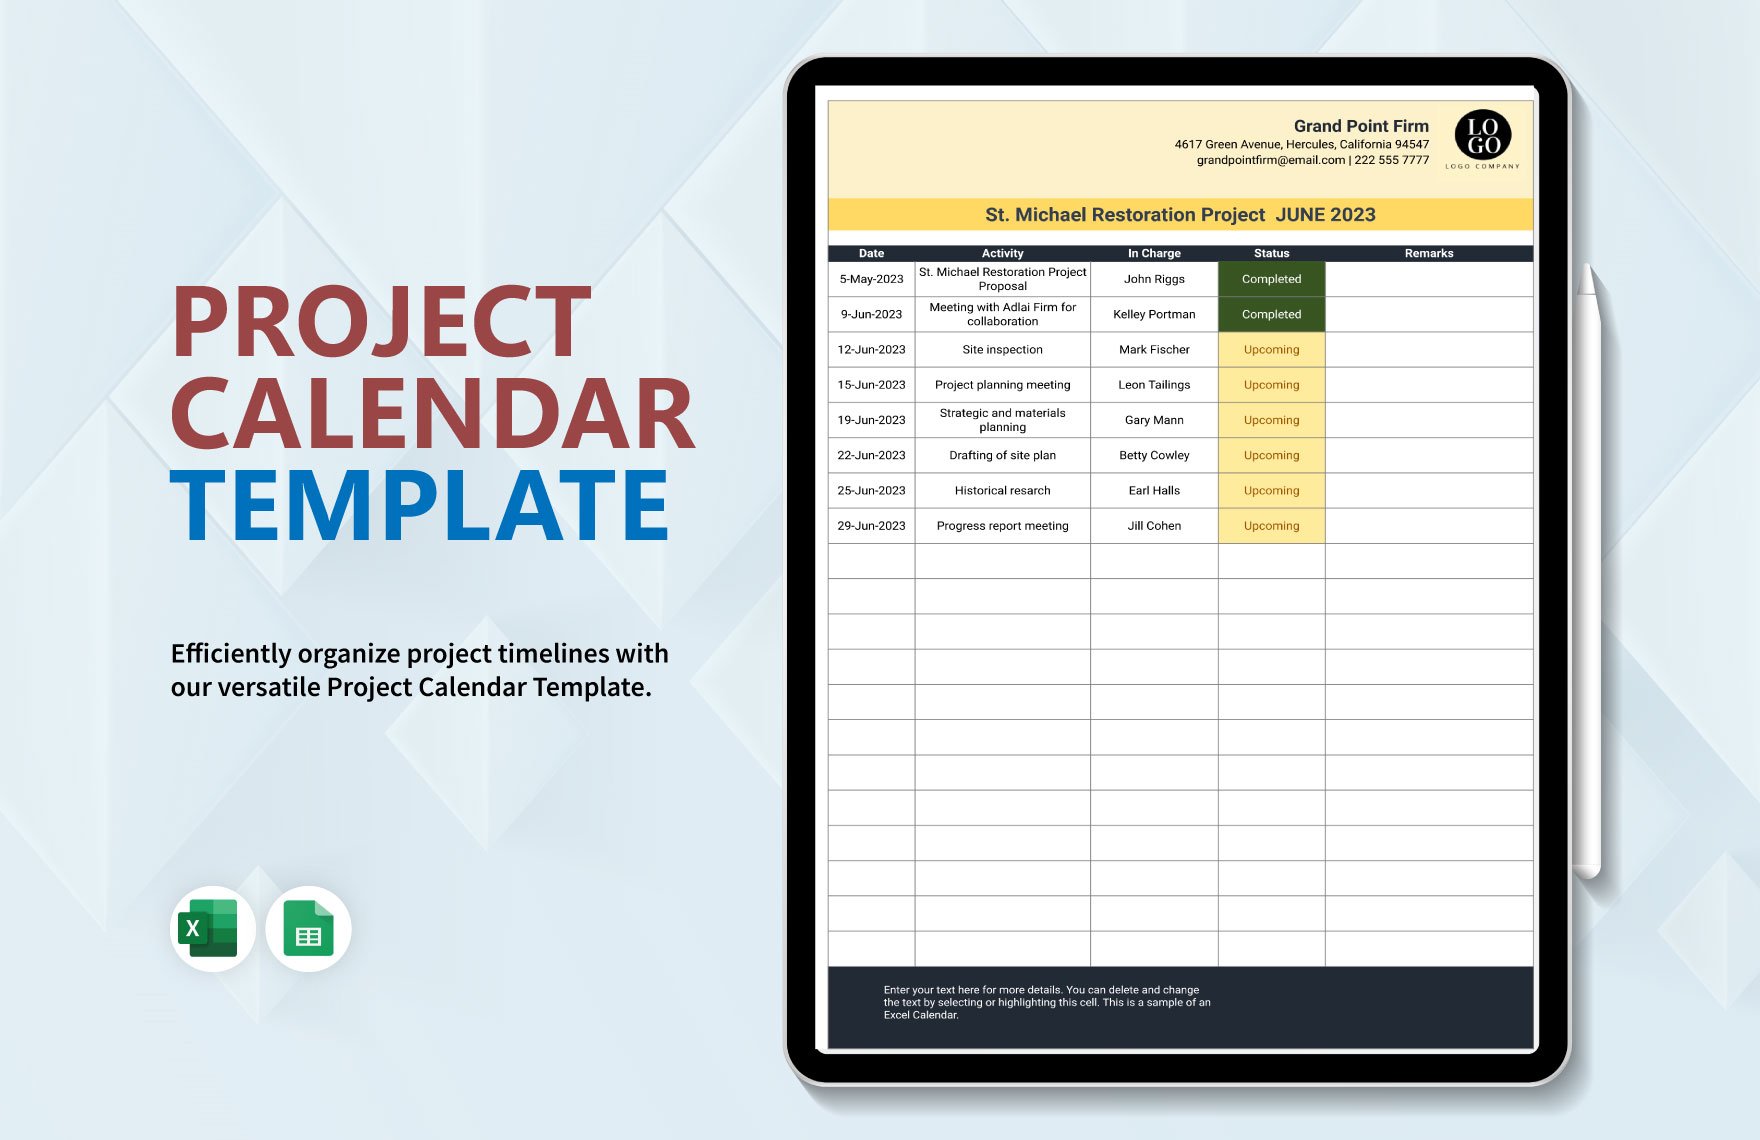 Project Calendar in Excel, Google Sheets